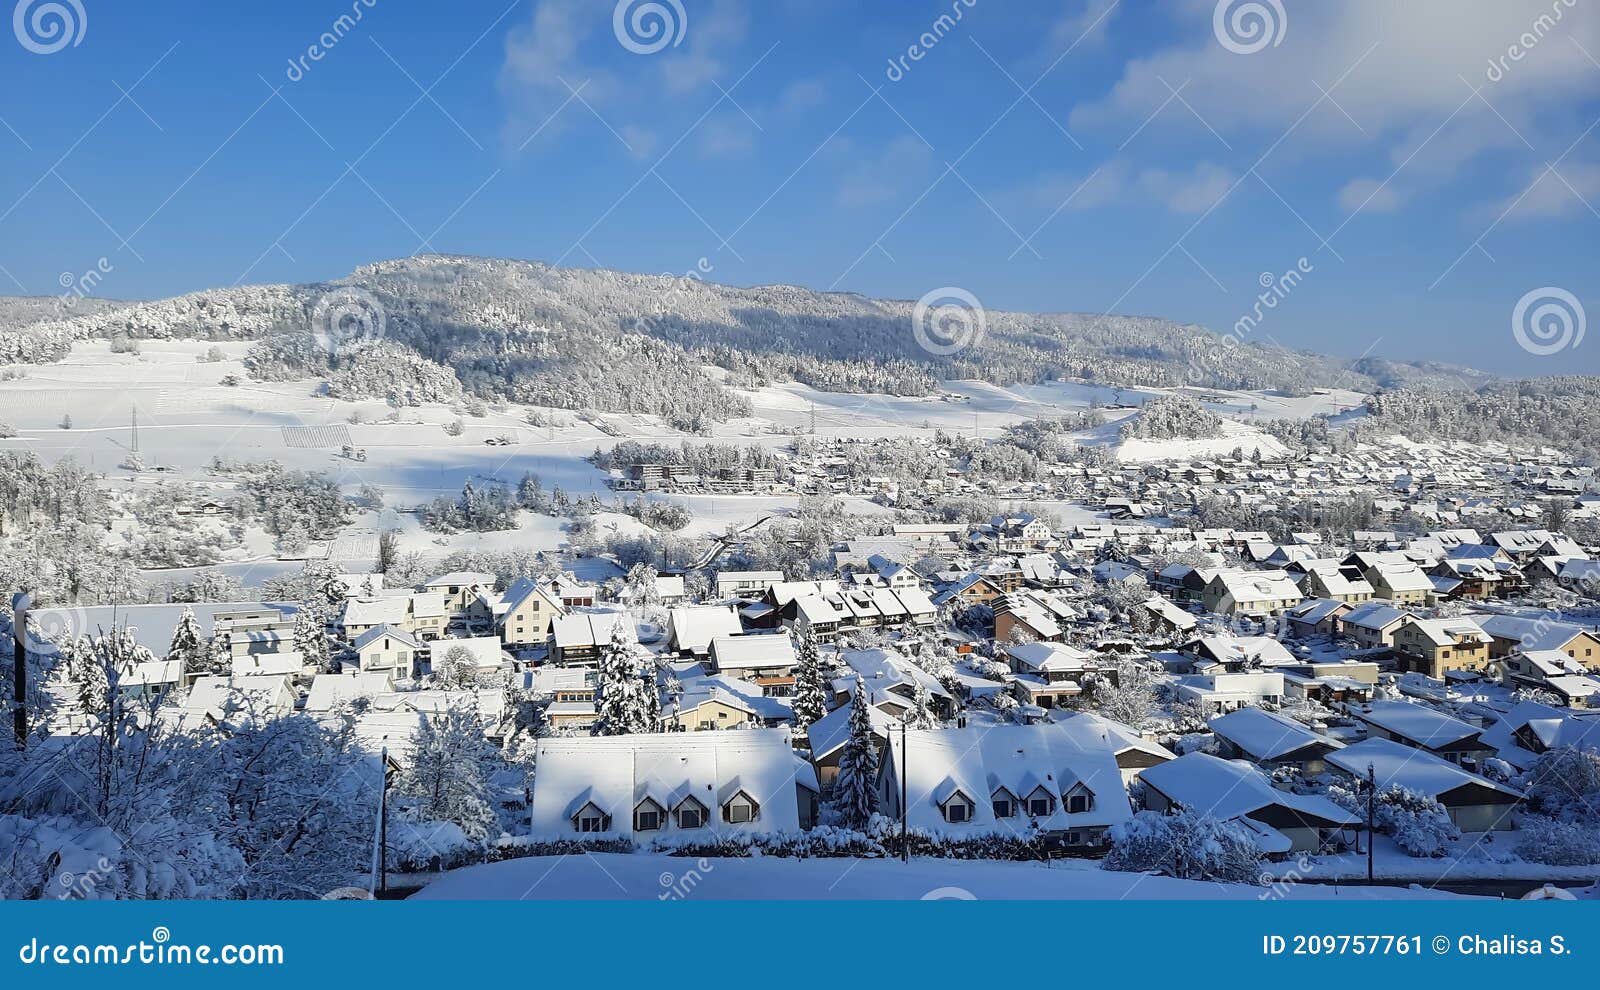 Beauty Snowy Winter Cityscape in Switzerland Aerial View. Winter Snow  Covered Background Stock Image - Image of slope, season: 209757761